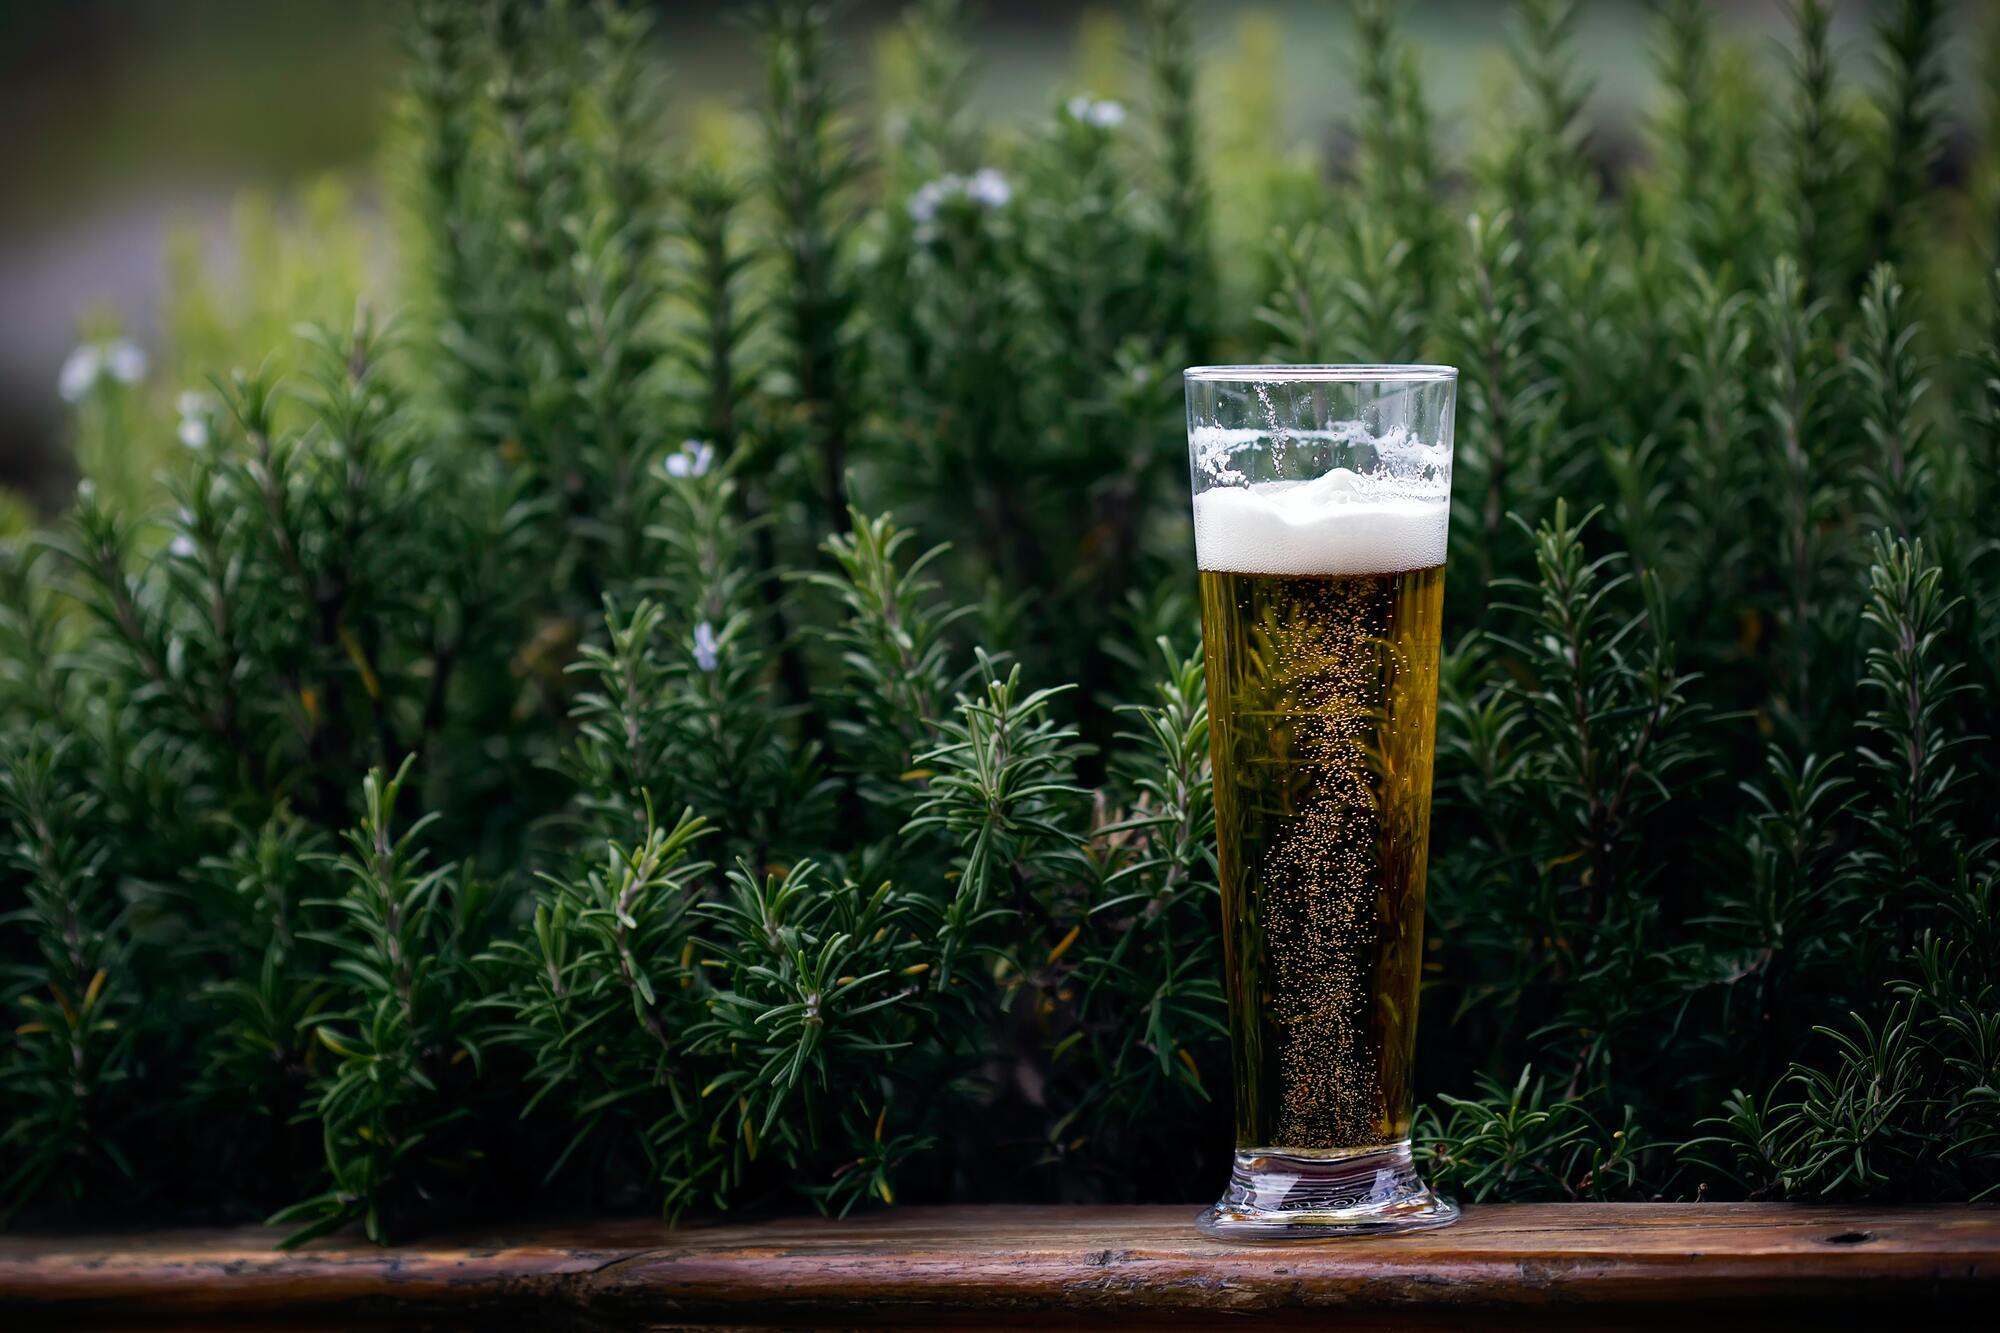 Why beer makes you want to eat